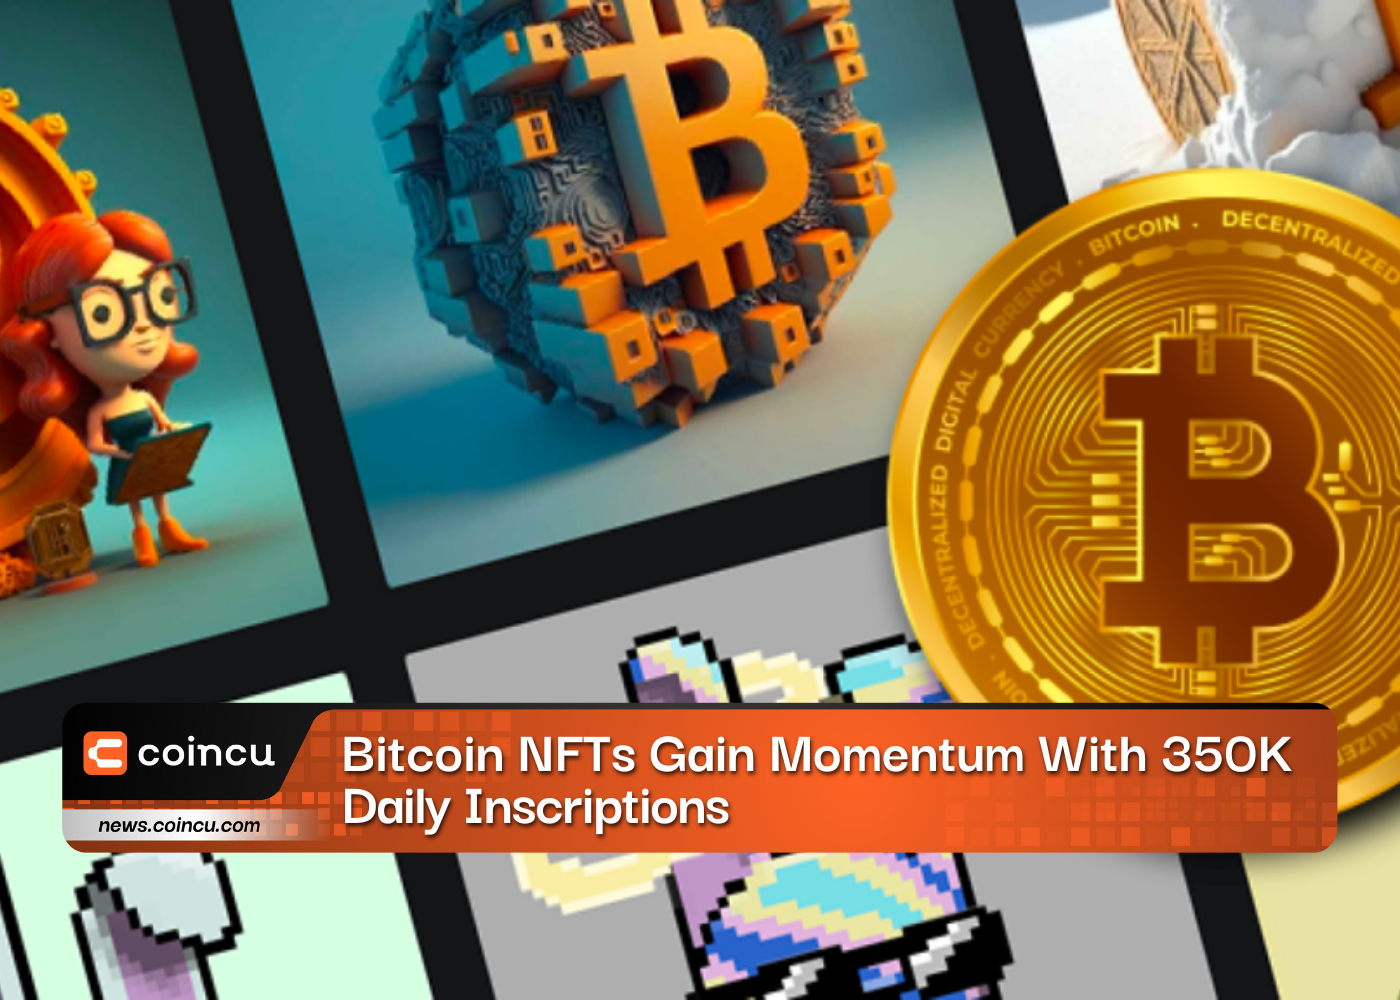 Bitcoin NFTs Gain Momentum With 350K